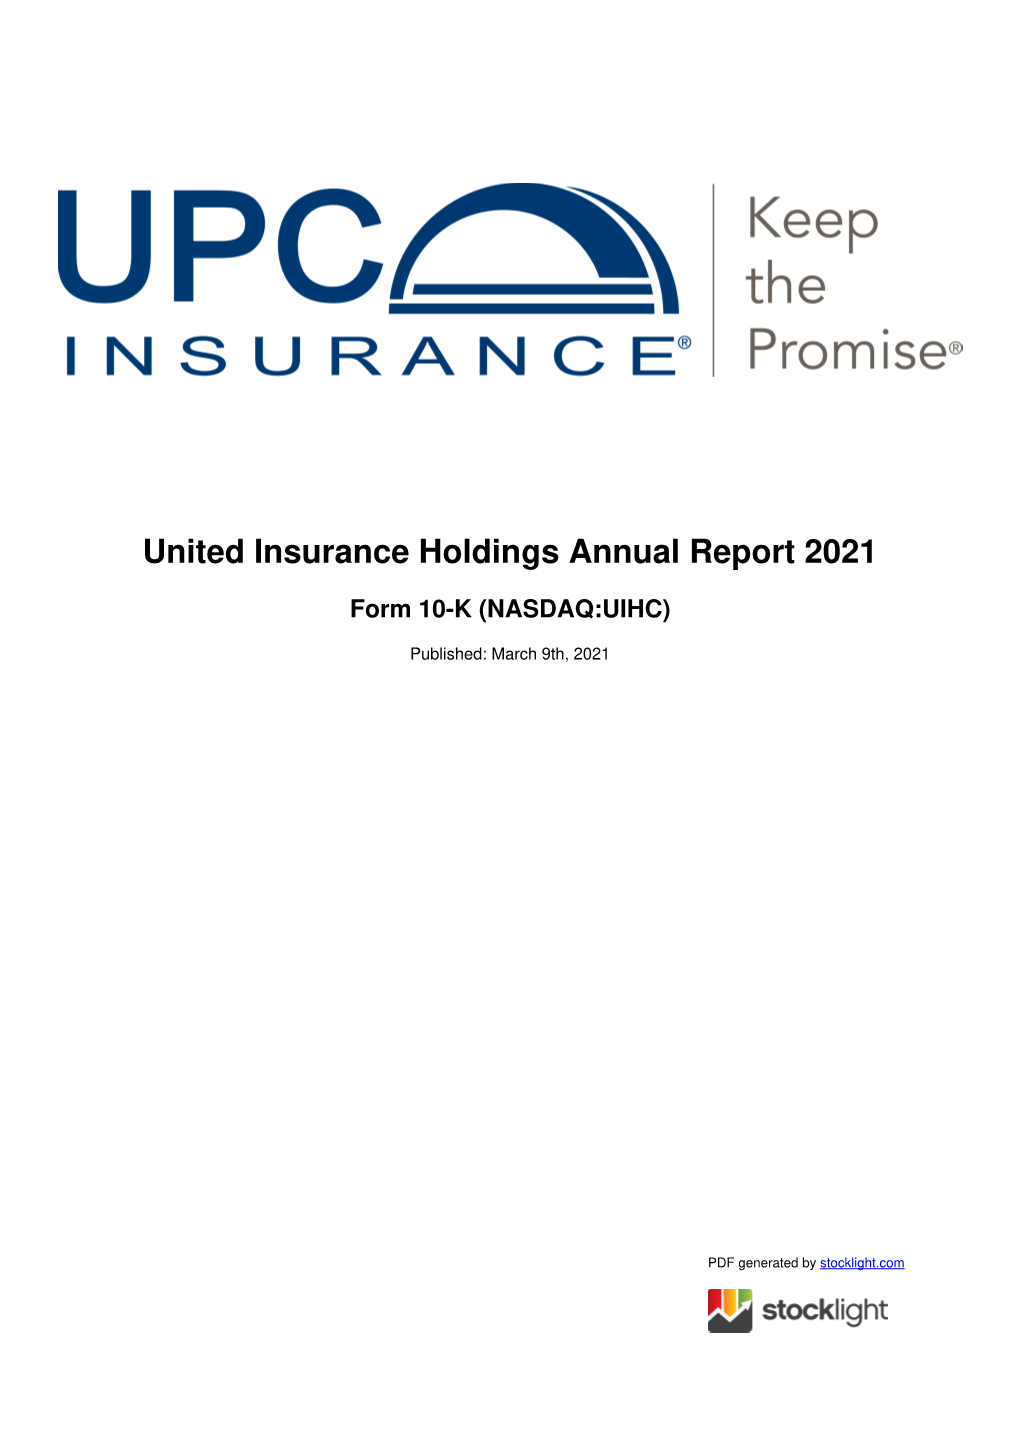 United Insurance Holdings Annual Report 2021